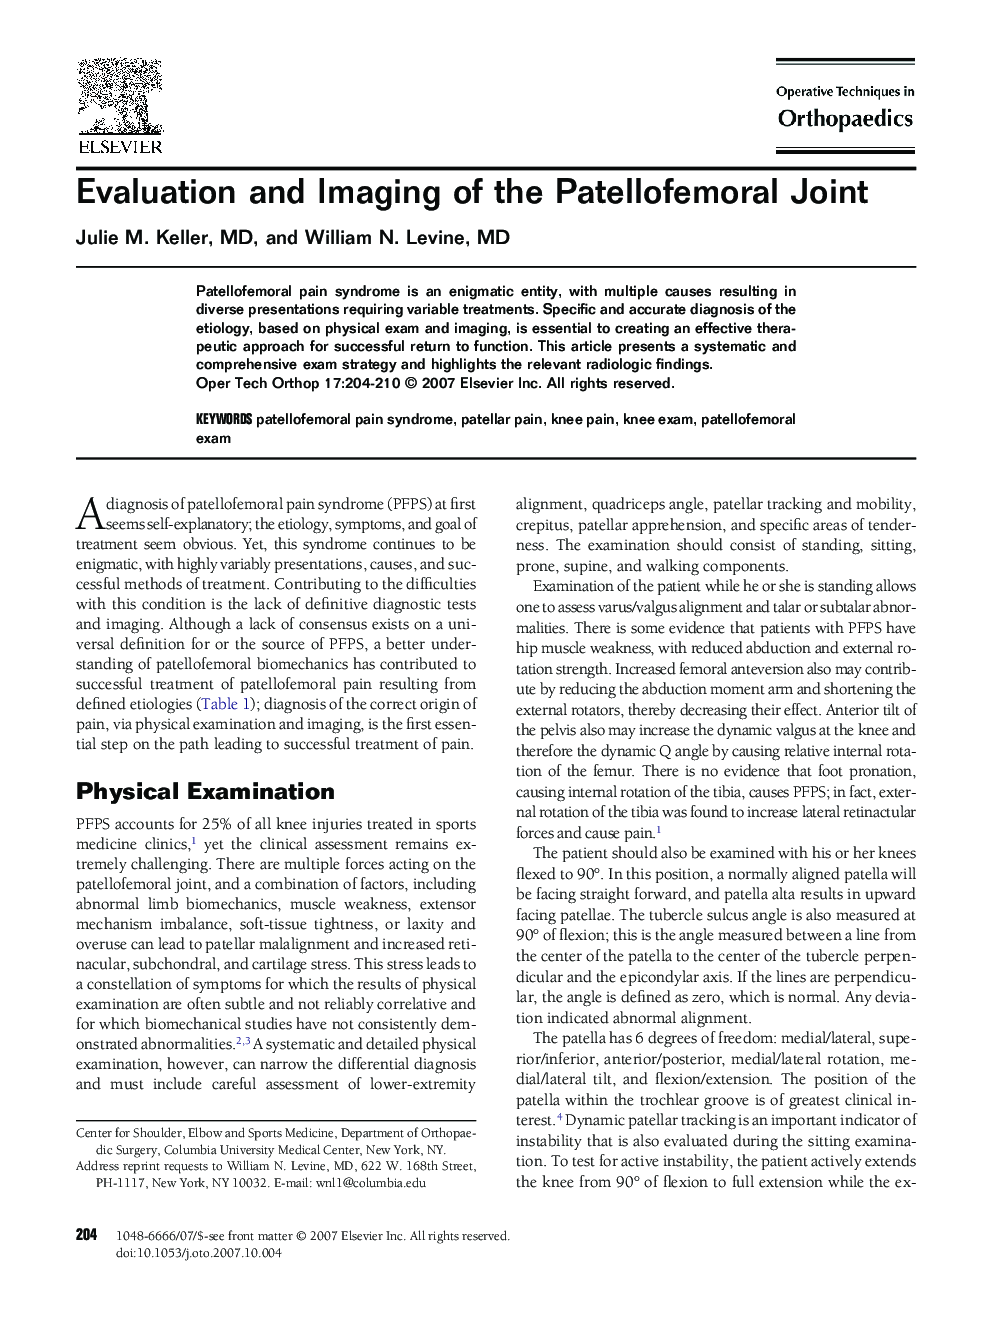 Evaluation and Imaging of the Patellofemoral Joint